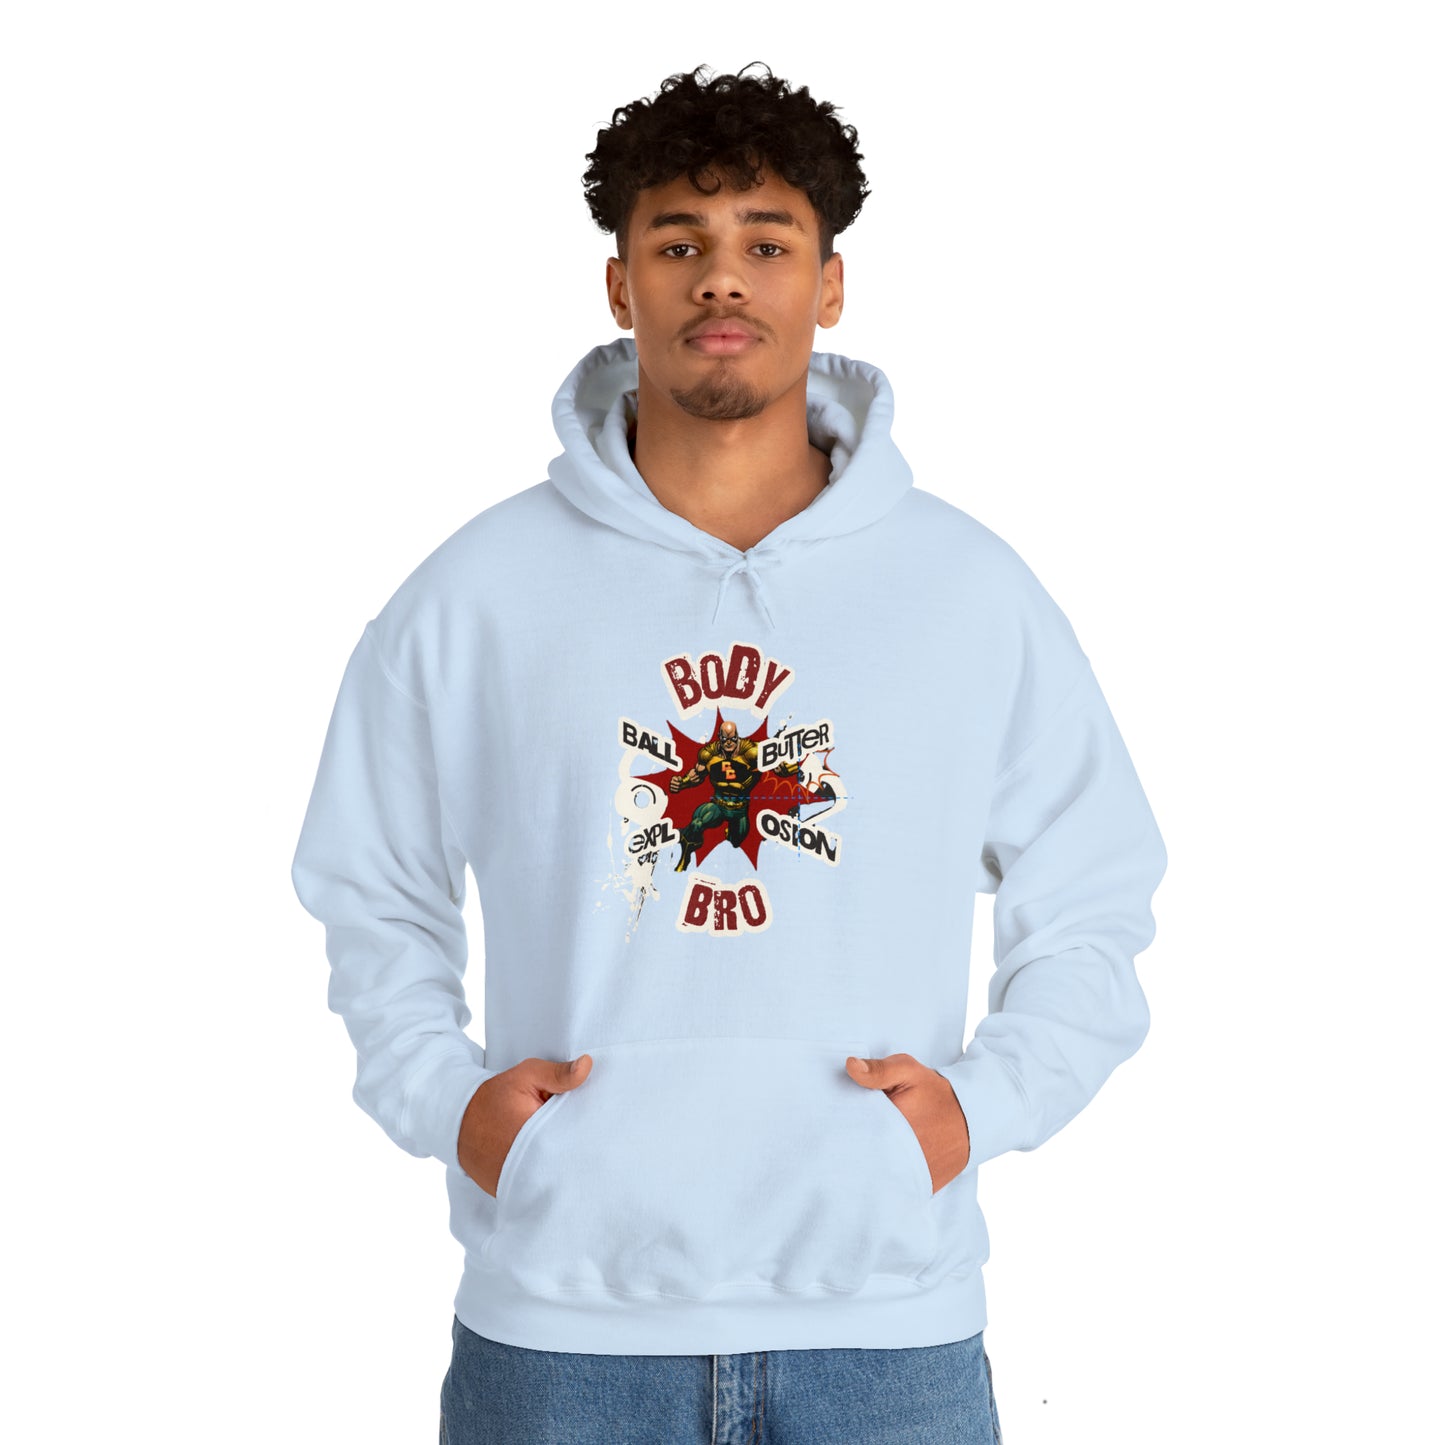 Body Bro Ball Butter Expl-osion Unisex Heavy Blend Hooded Sweatshirt,Unisex Graphic Pullover ,Men's Comfortable Artistic Hoodie, Gifts for Gym Enthusiasts, Bold Fashion Pullover